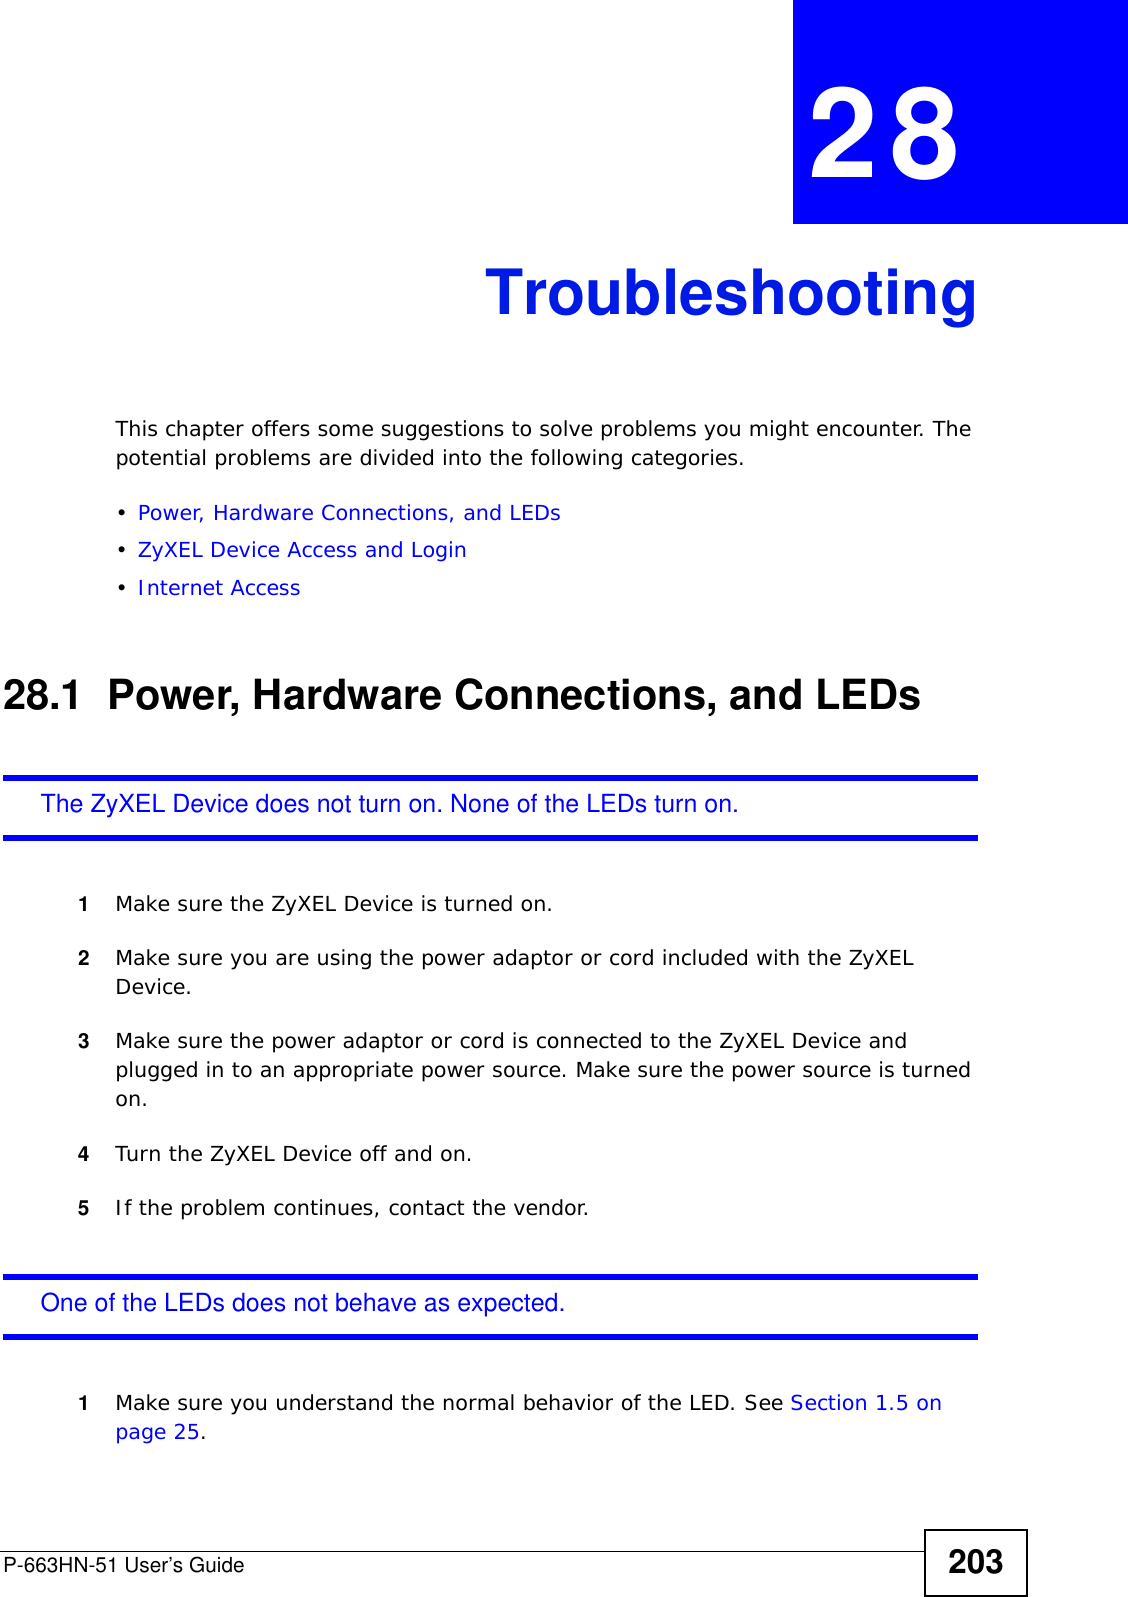 P-663HN-51 User’s Guide 203CHAPTER  28 TroubleshootingThis chapter offers some suggestions to solve problems you might encounter. The potential problems are divided into the following categories. •Power, Hardware Connections, and LEDs•ZyXEL Device Access and Login•Internet Access28.1  Power, Hardware Connections, and LEDsThe ZyXEL Device does not turn on. None of the LEDs turn on.1Make sure the ZyXEL Device is turned on. 2Make sure you are using the power adaptor or cord included with the ZyXEL Device.3Make sure the power adaptor or cord is connected to the ZyXEL Device and plugged in to an appropriate power source. Make sure the power source is turned on.4Turn the ZyXEL Device off and on.5If the problem continues, contact the vendor.One of the LEDs does not behave as expected.1Make sure you understand the normal behavior of the LED. See Section 1.5 on page 25.